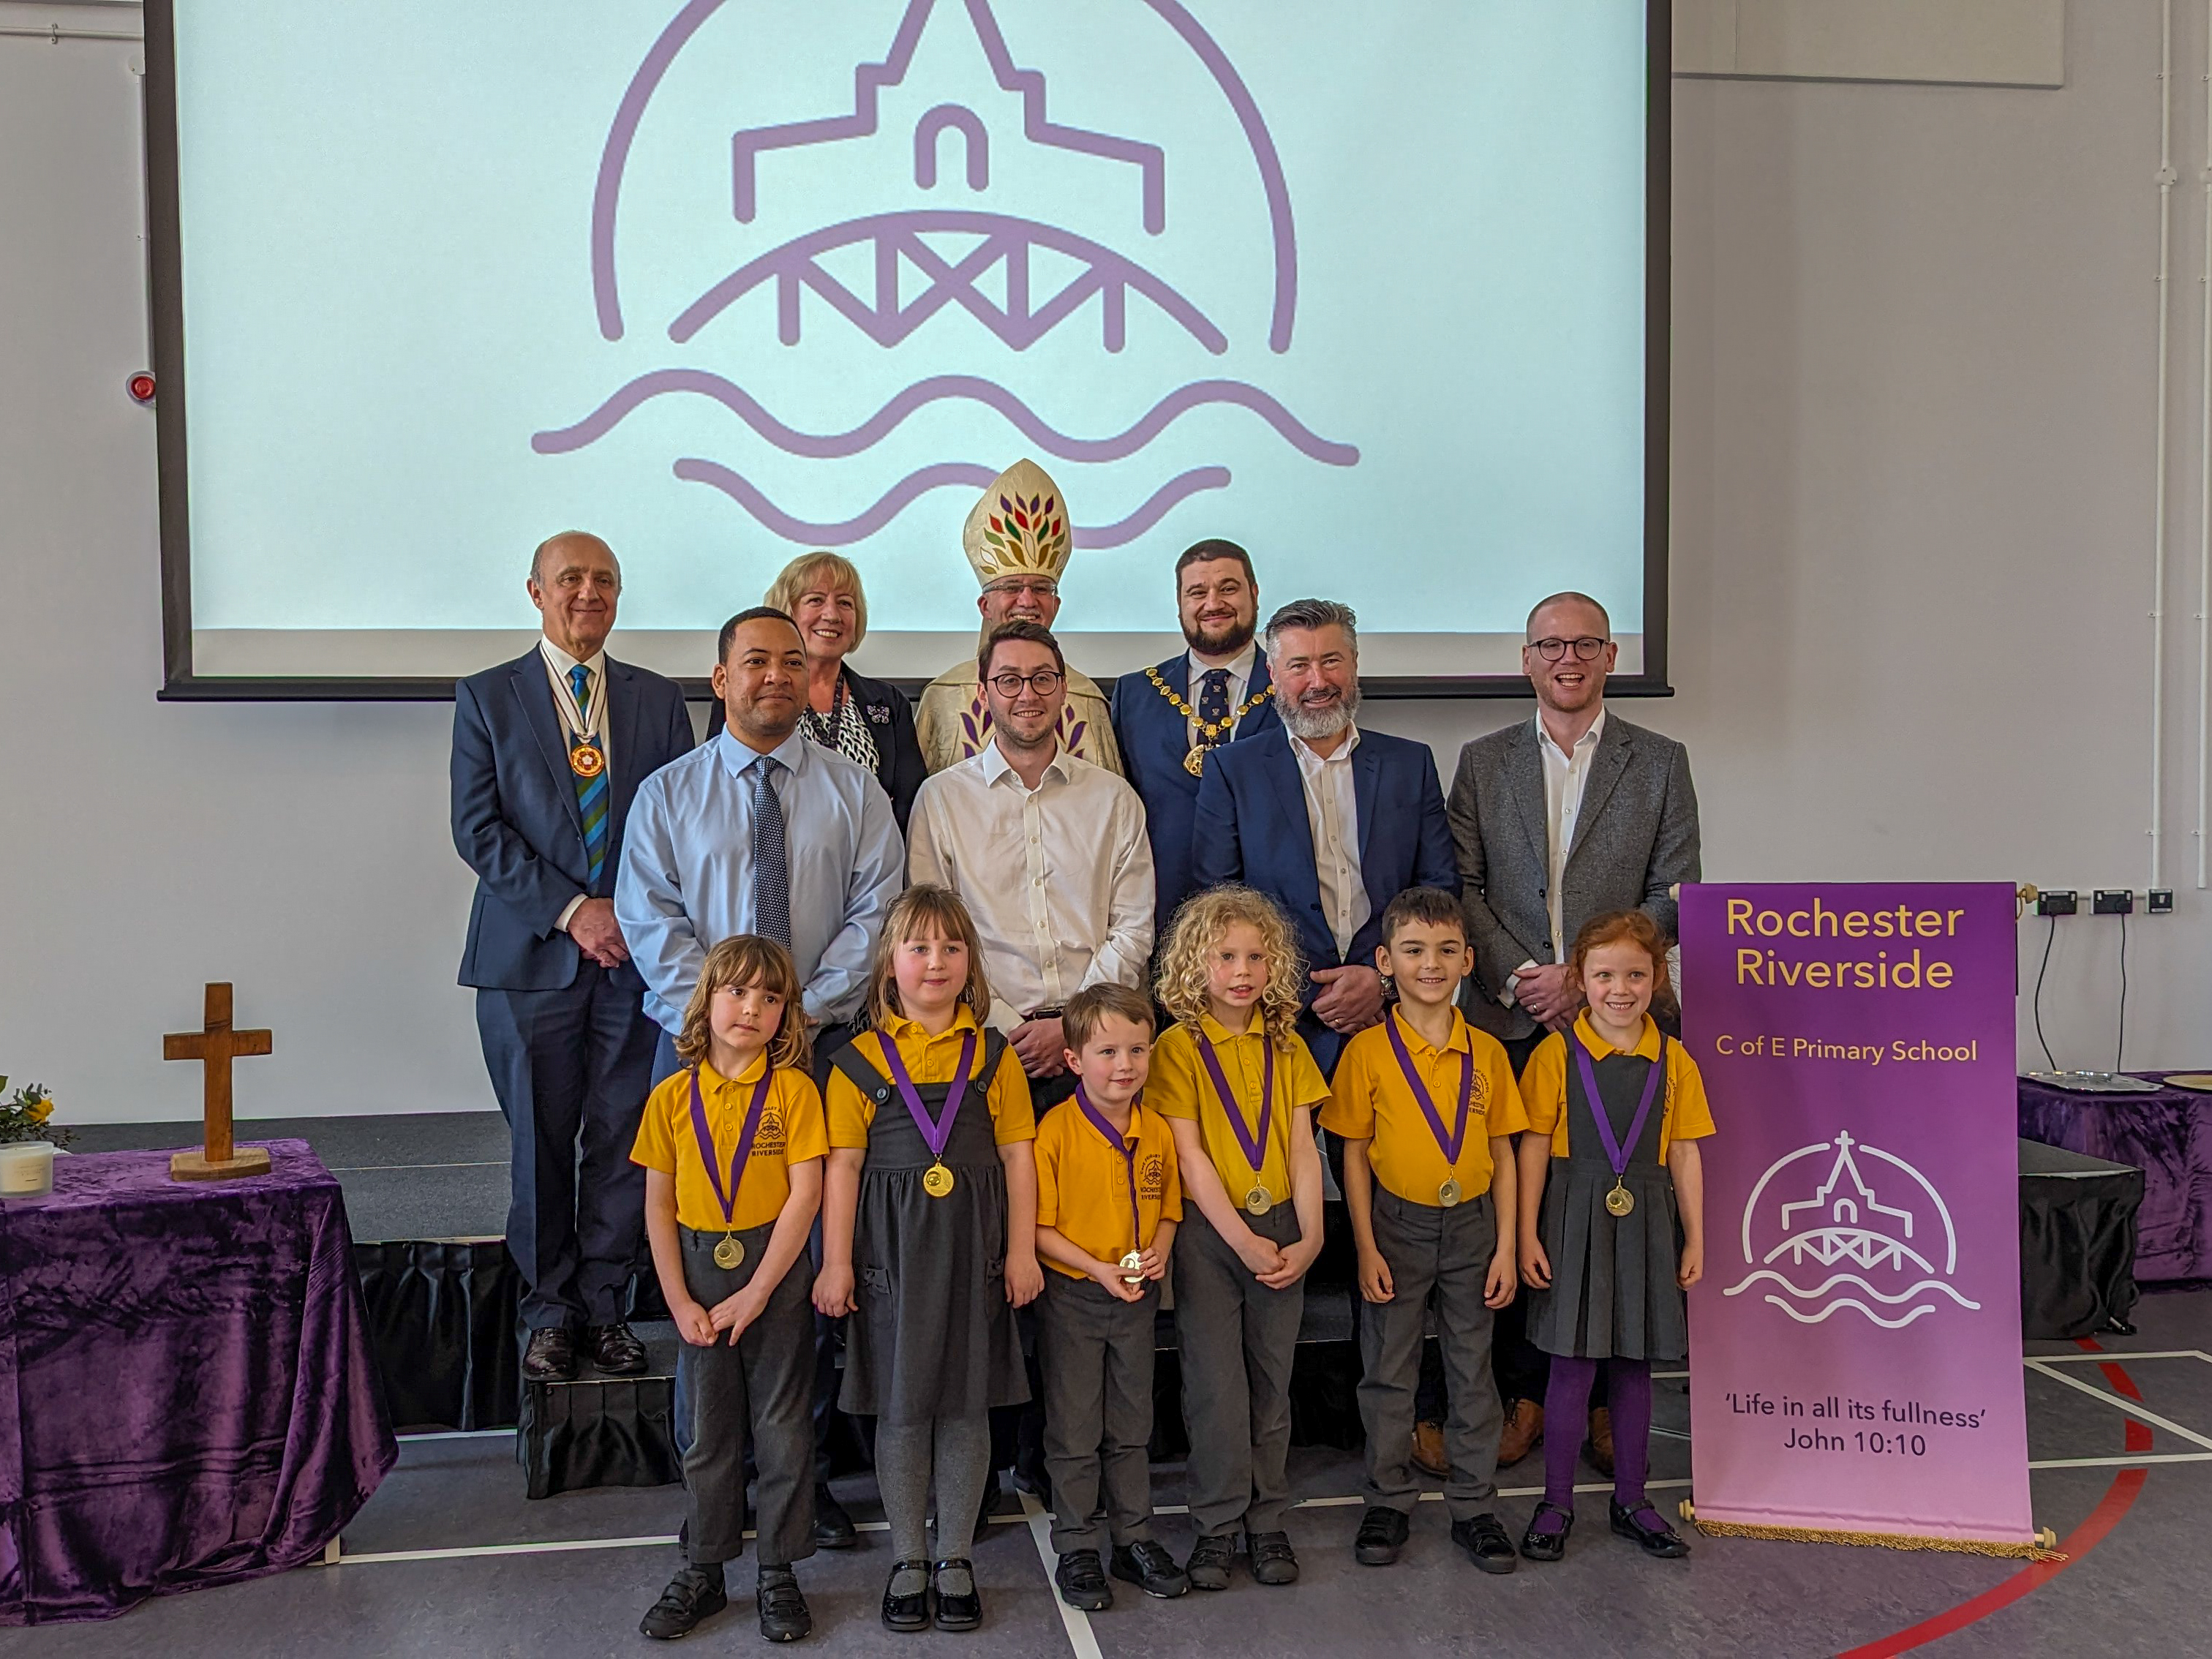 Civic dignataries, and representatives from the Trust and the developers join the medal winning pupils